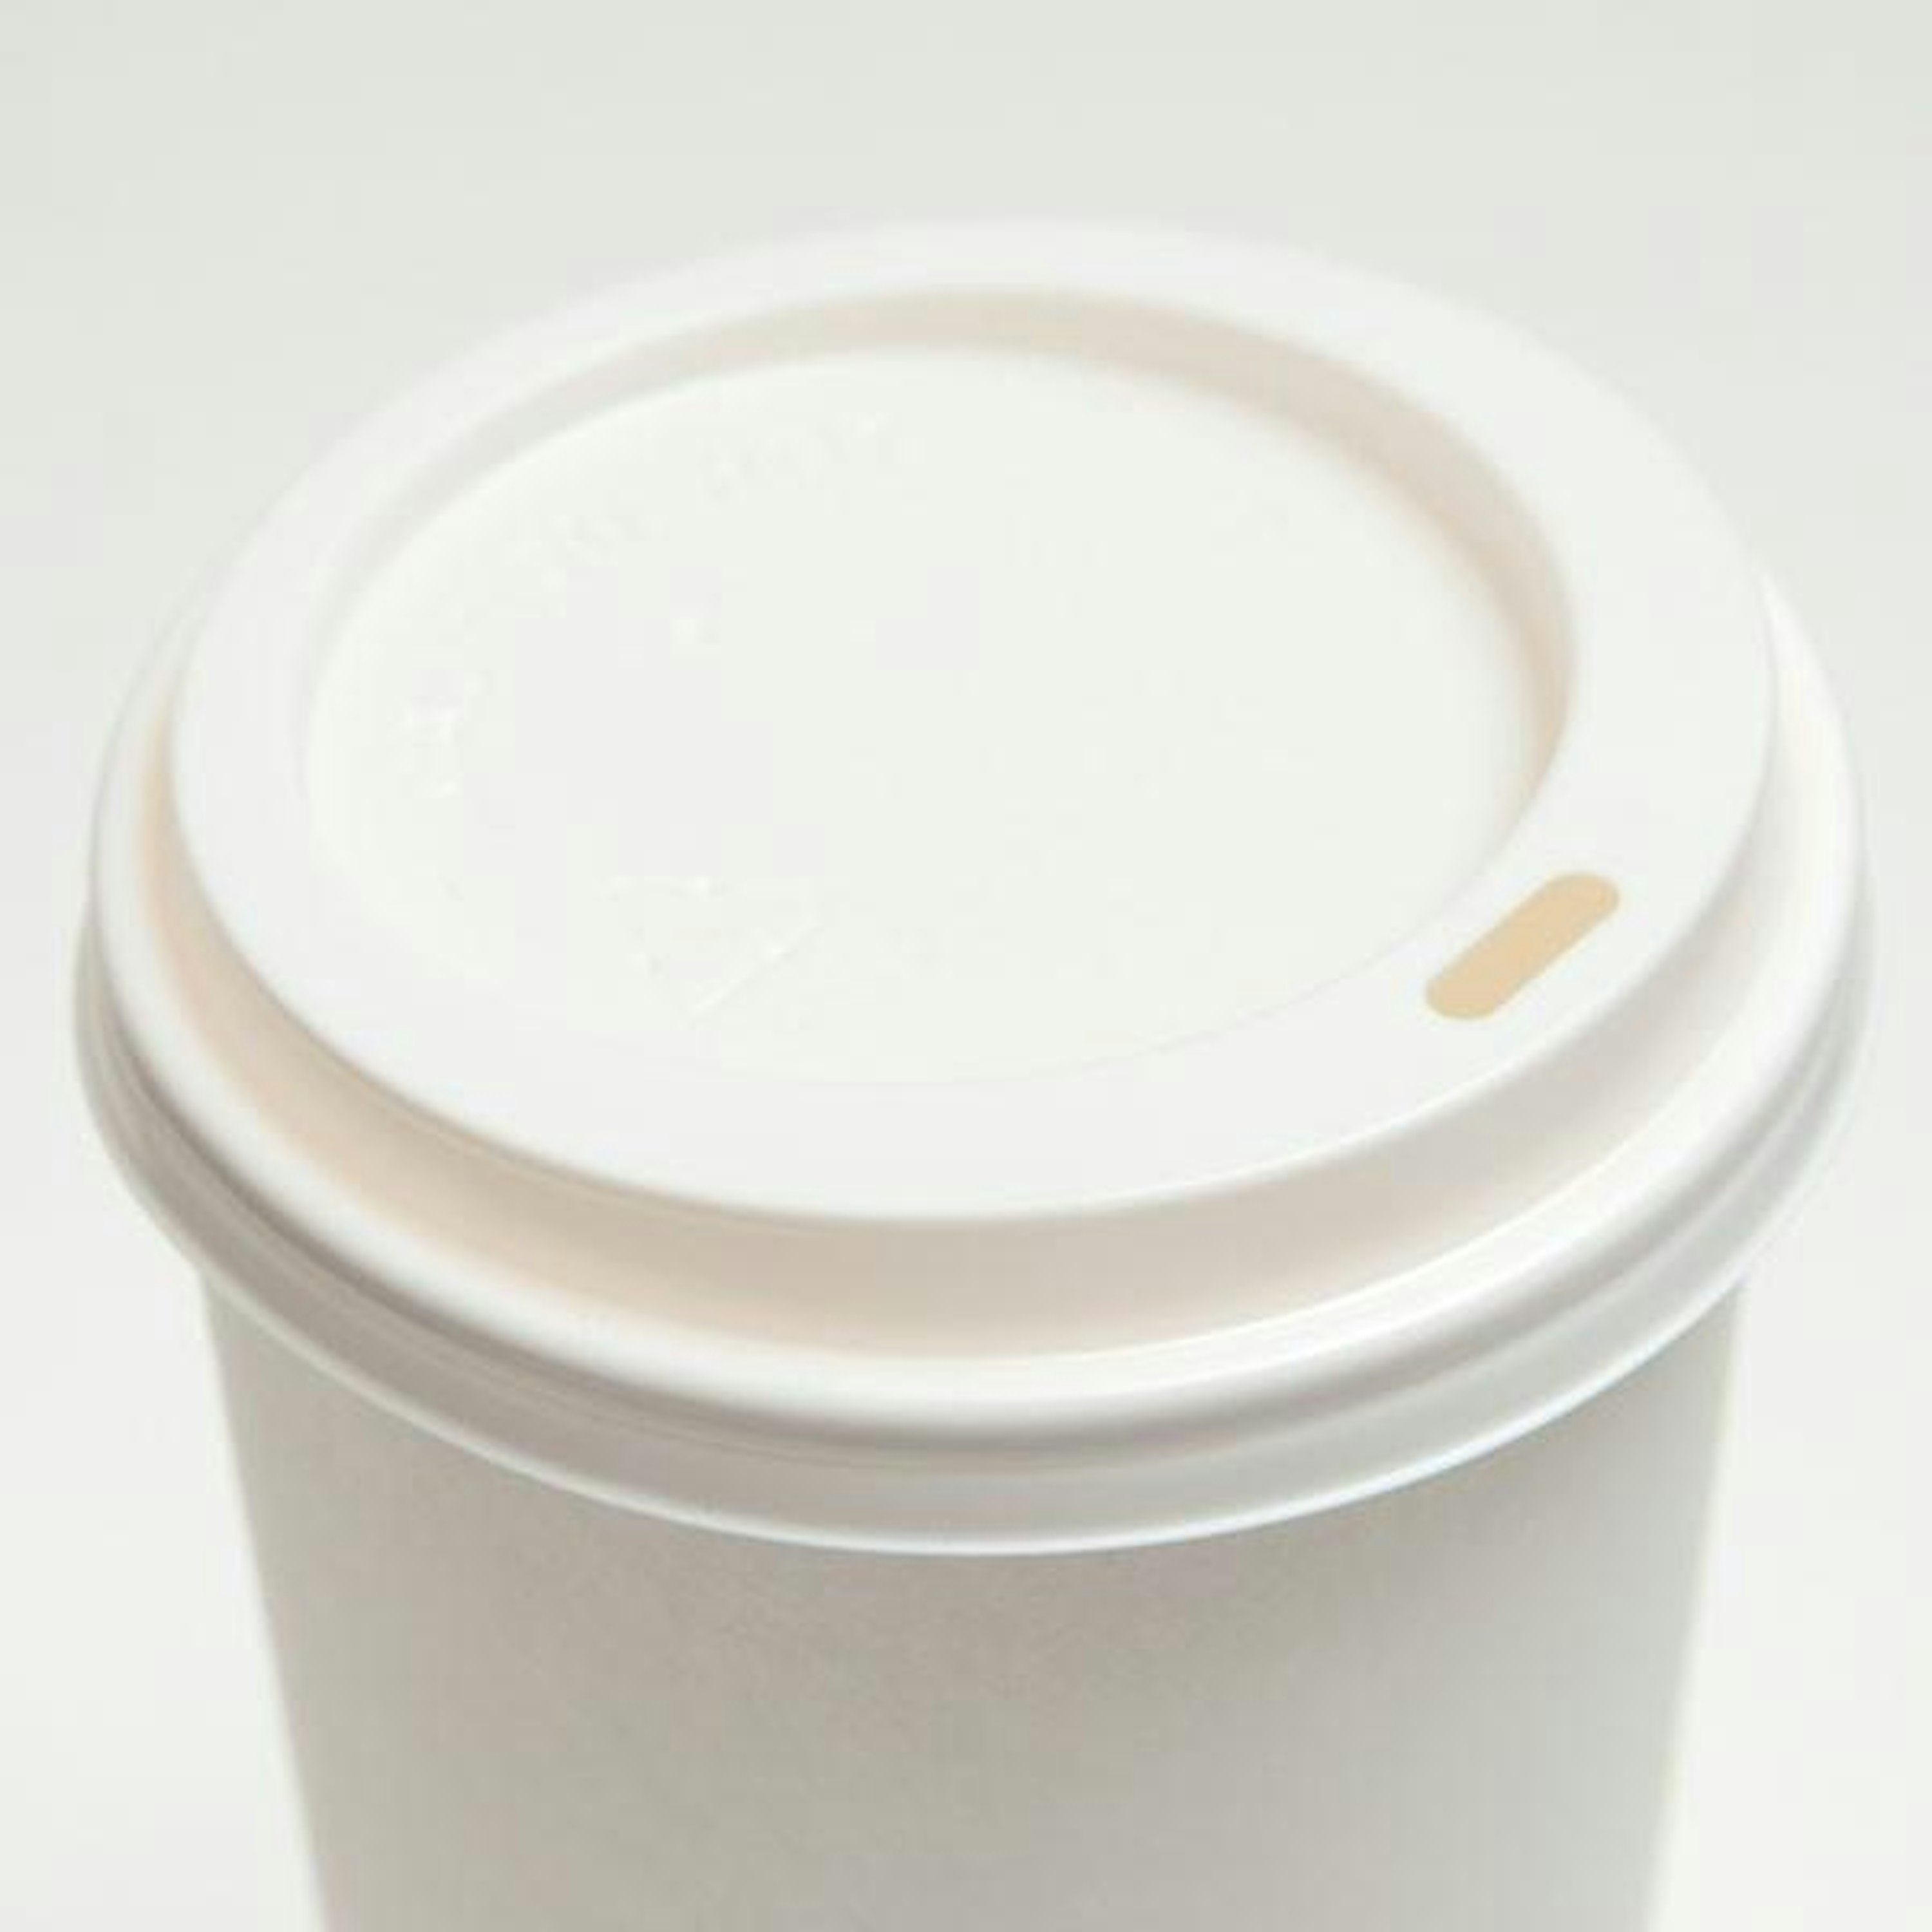  CarryOut Supplies Paper Coffee Cups 